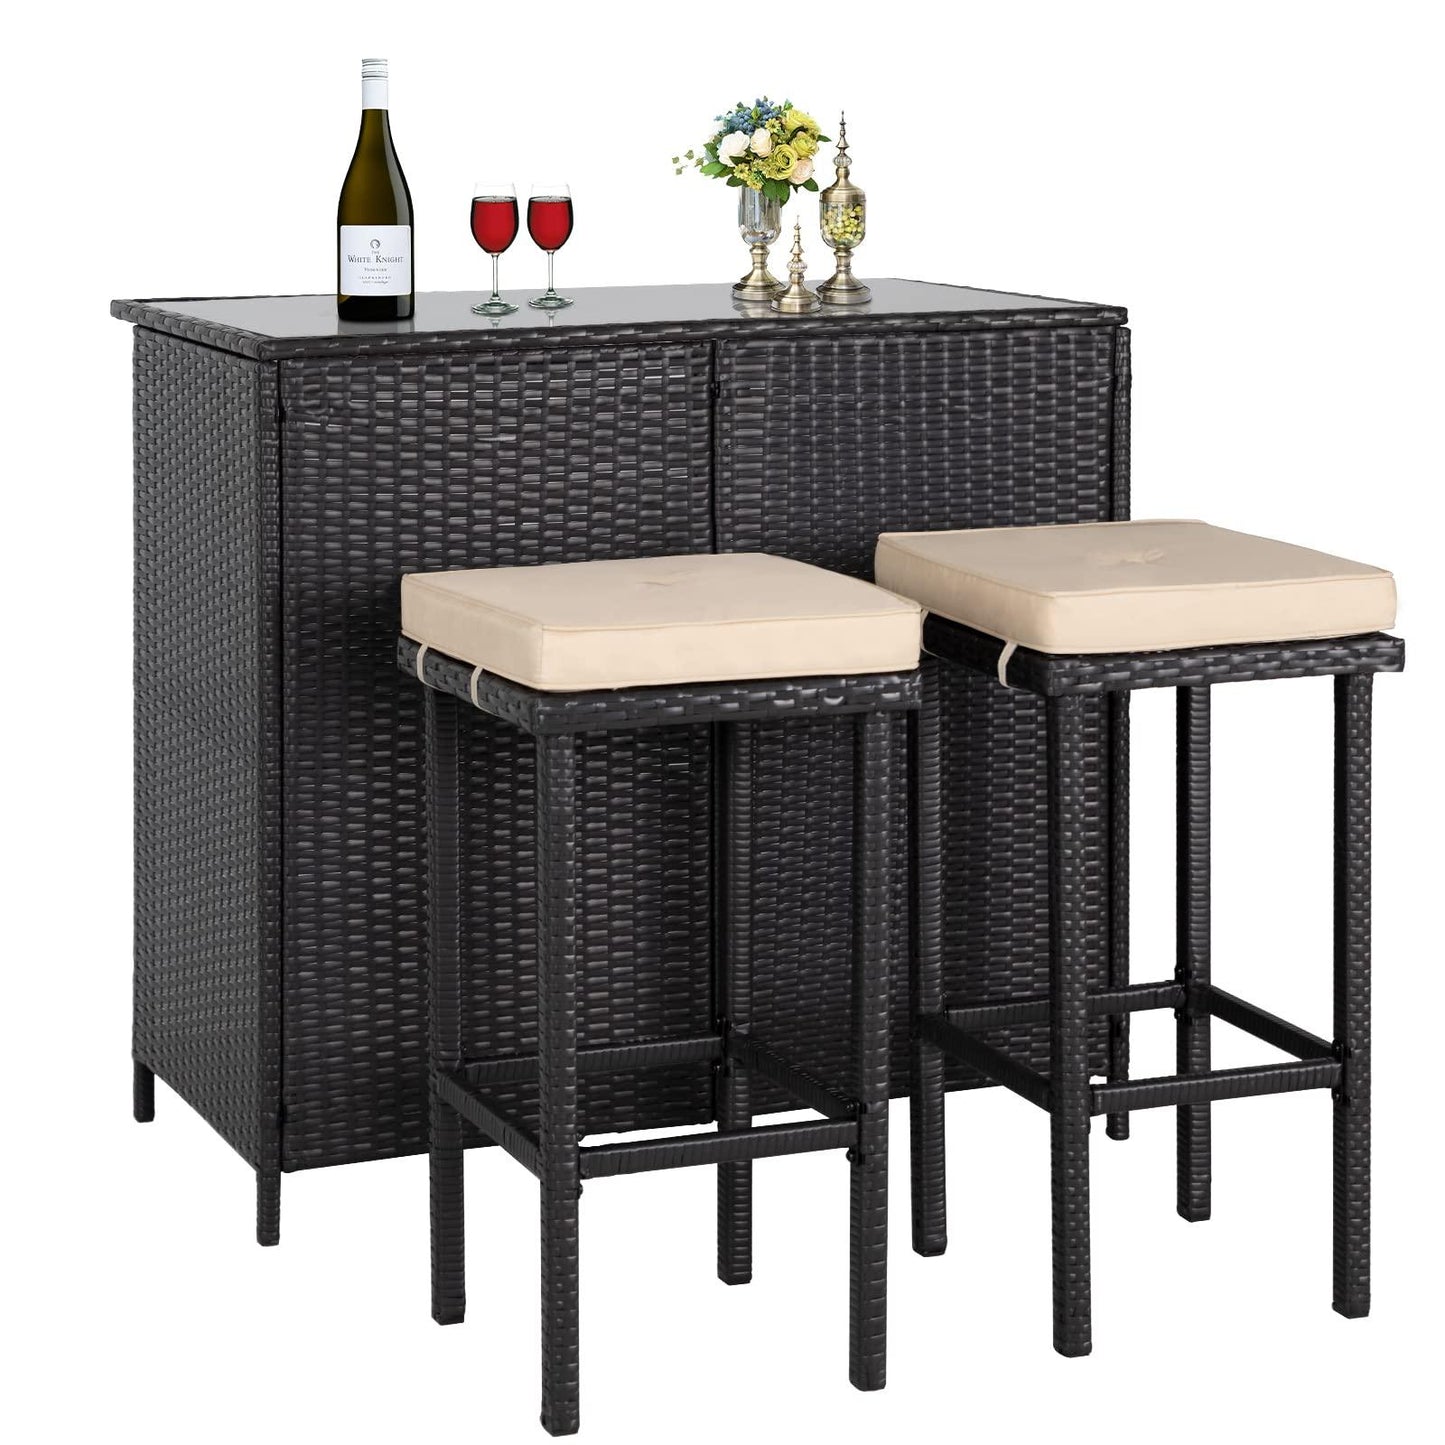 Crownland 3-Piece Wicker Patio Outdoor Bar Set, 2 Stools and 1 Glass Top Table, Bistro Set, Brown Furniture for Deck, Lawn, Backyard - CookCave